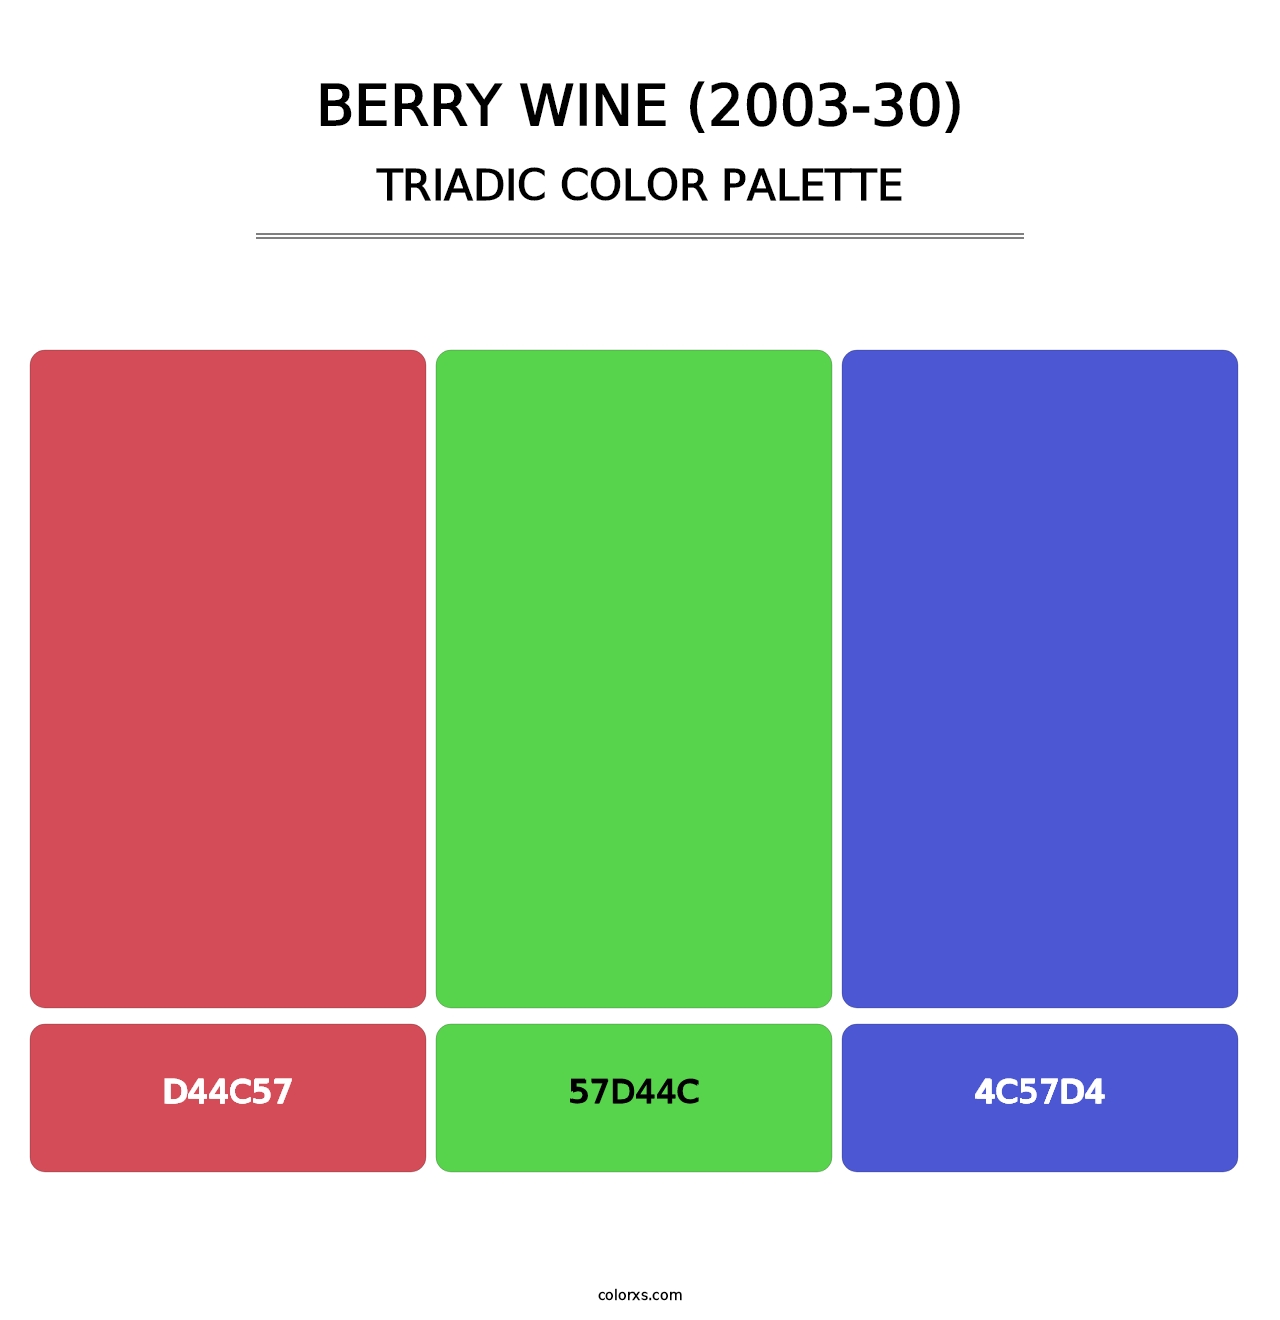 Berry Wine (2003-30) - Triadic Color Palette